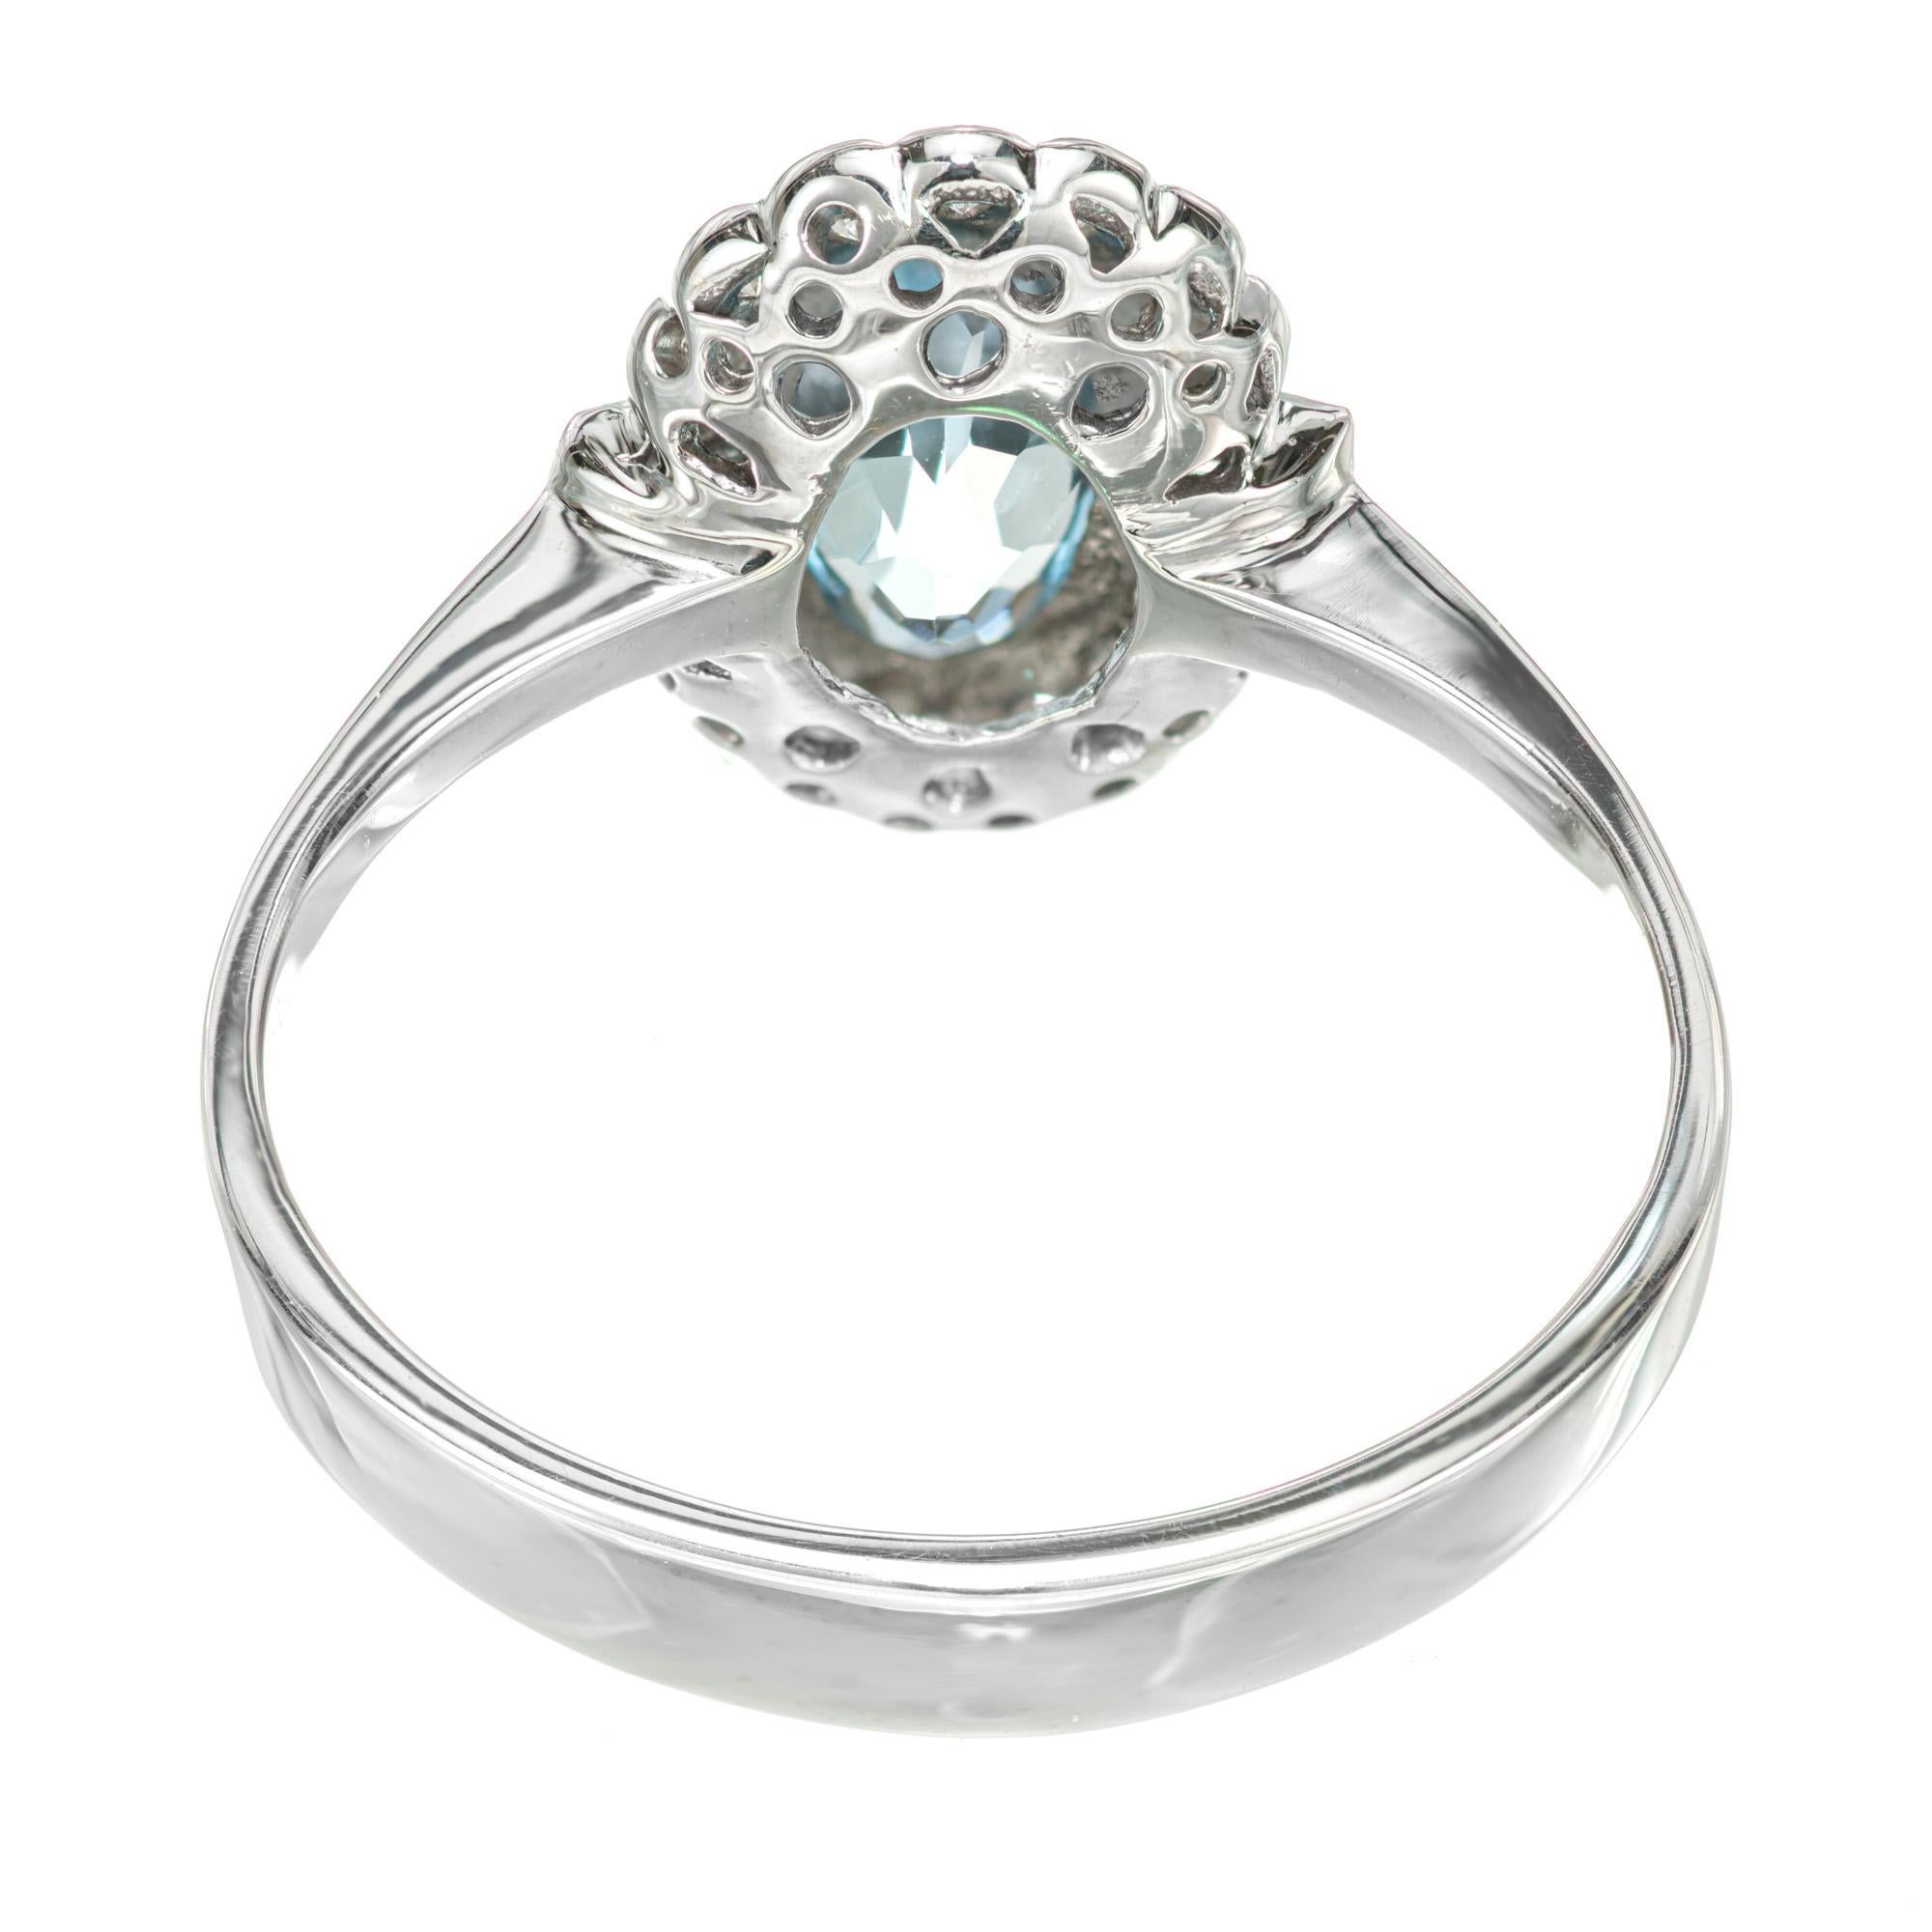 1.00 Carat Aquamarine Diamond Halo White Gold Ring In Good Condition For Sale In Stamford, CT